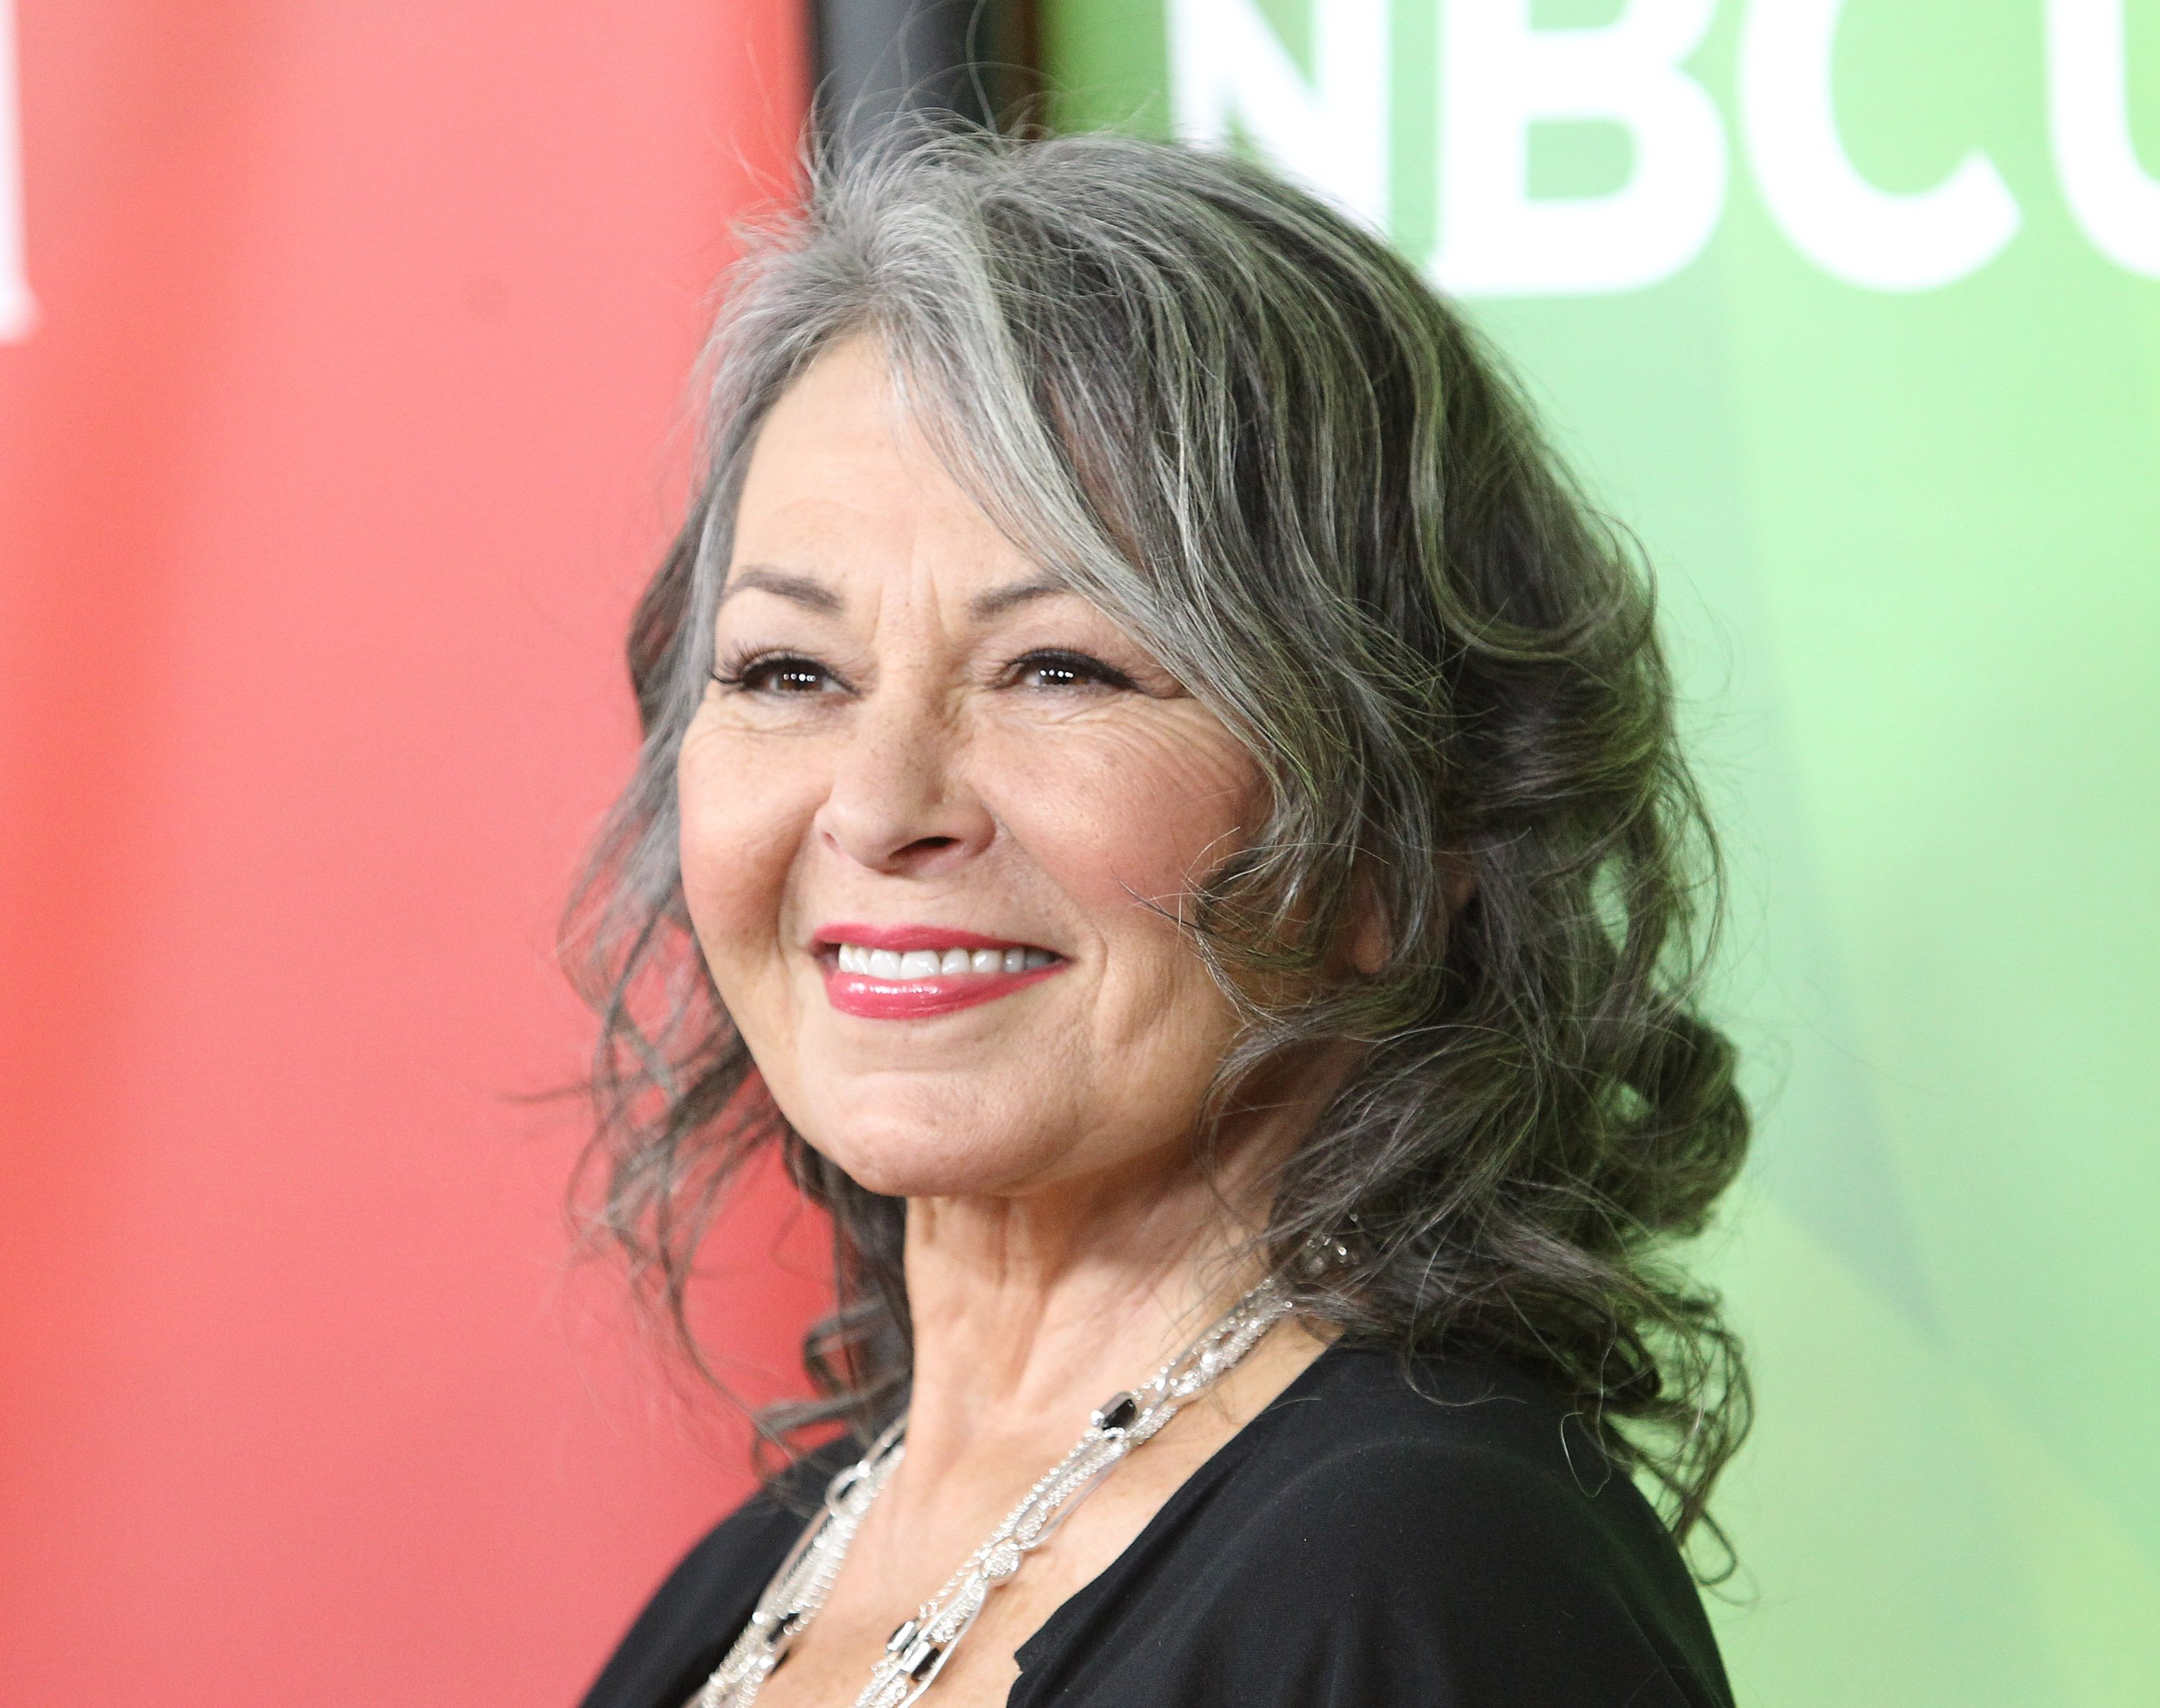 Roseanne Barr in California in 2014. | Source: Getty Images